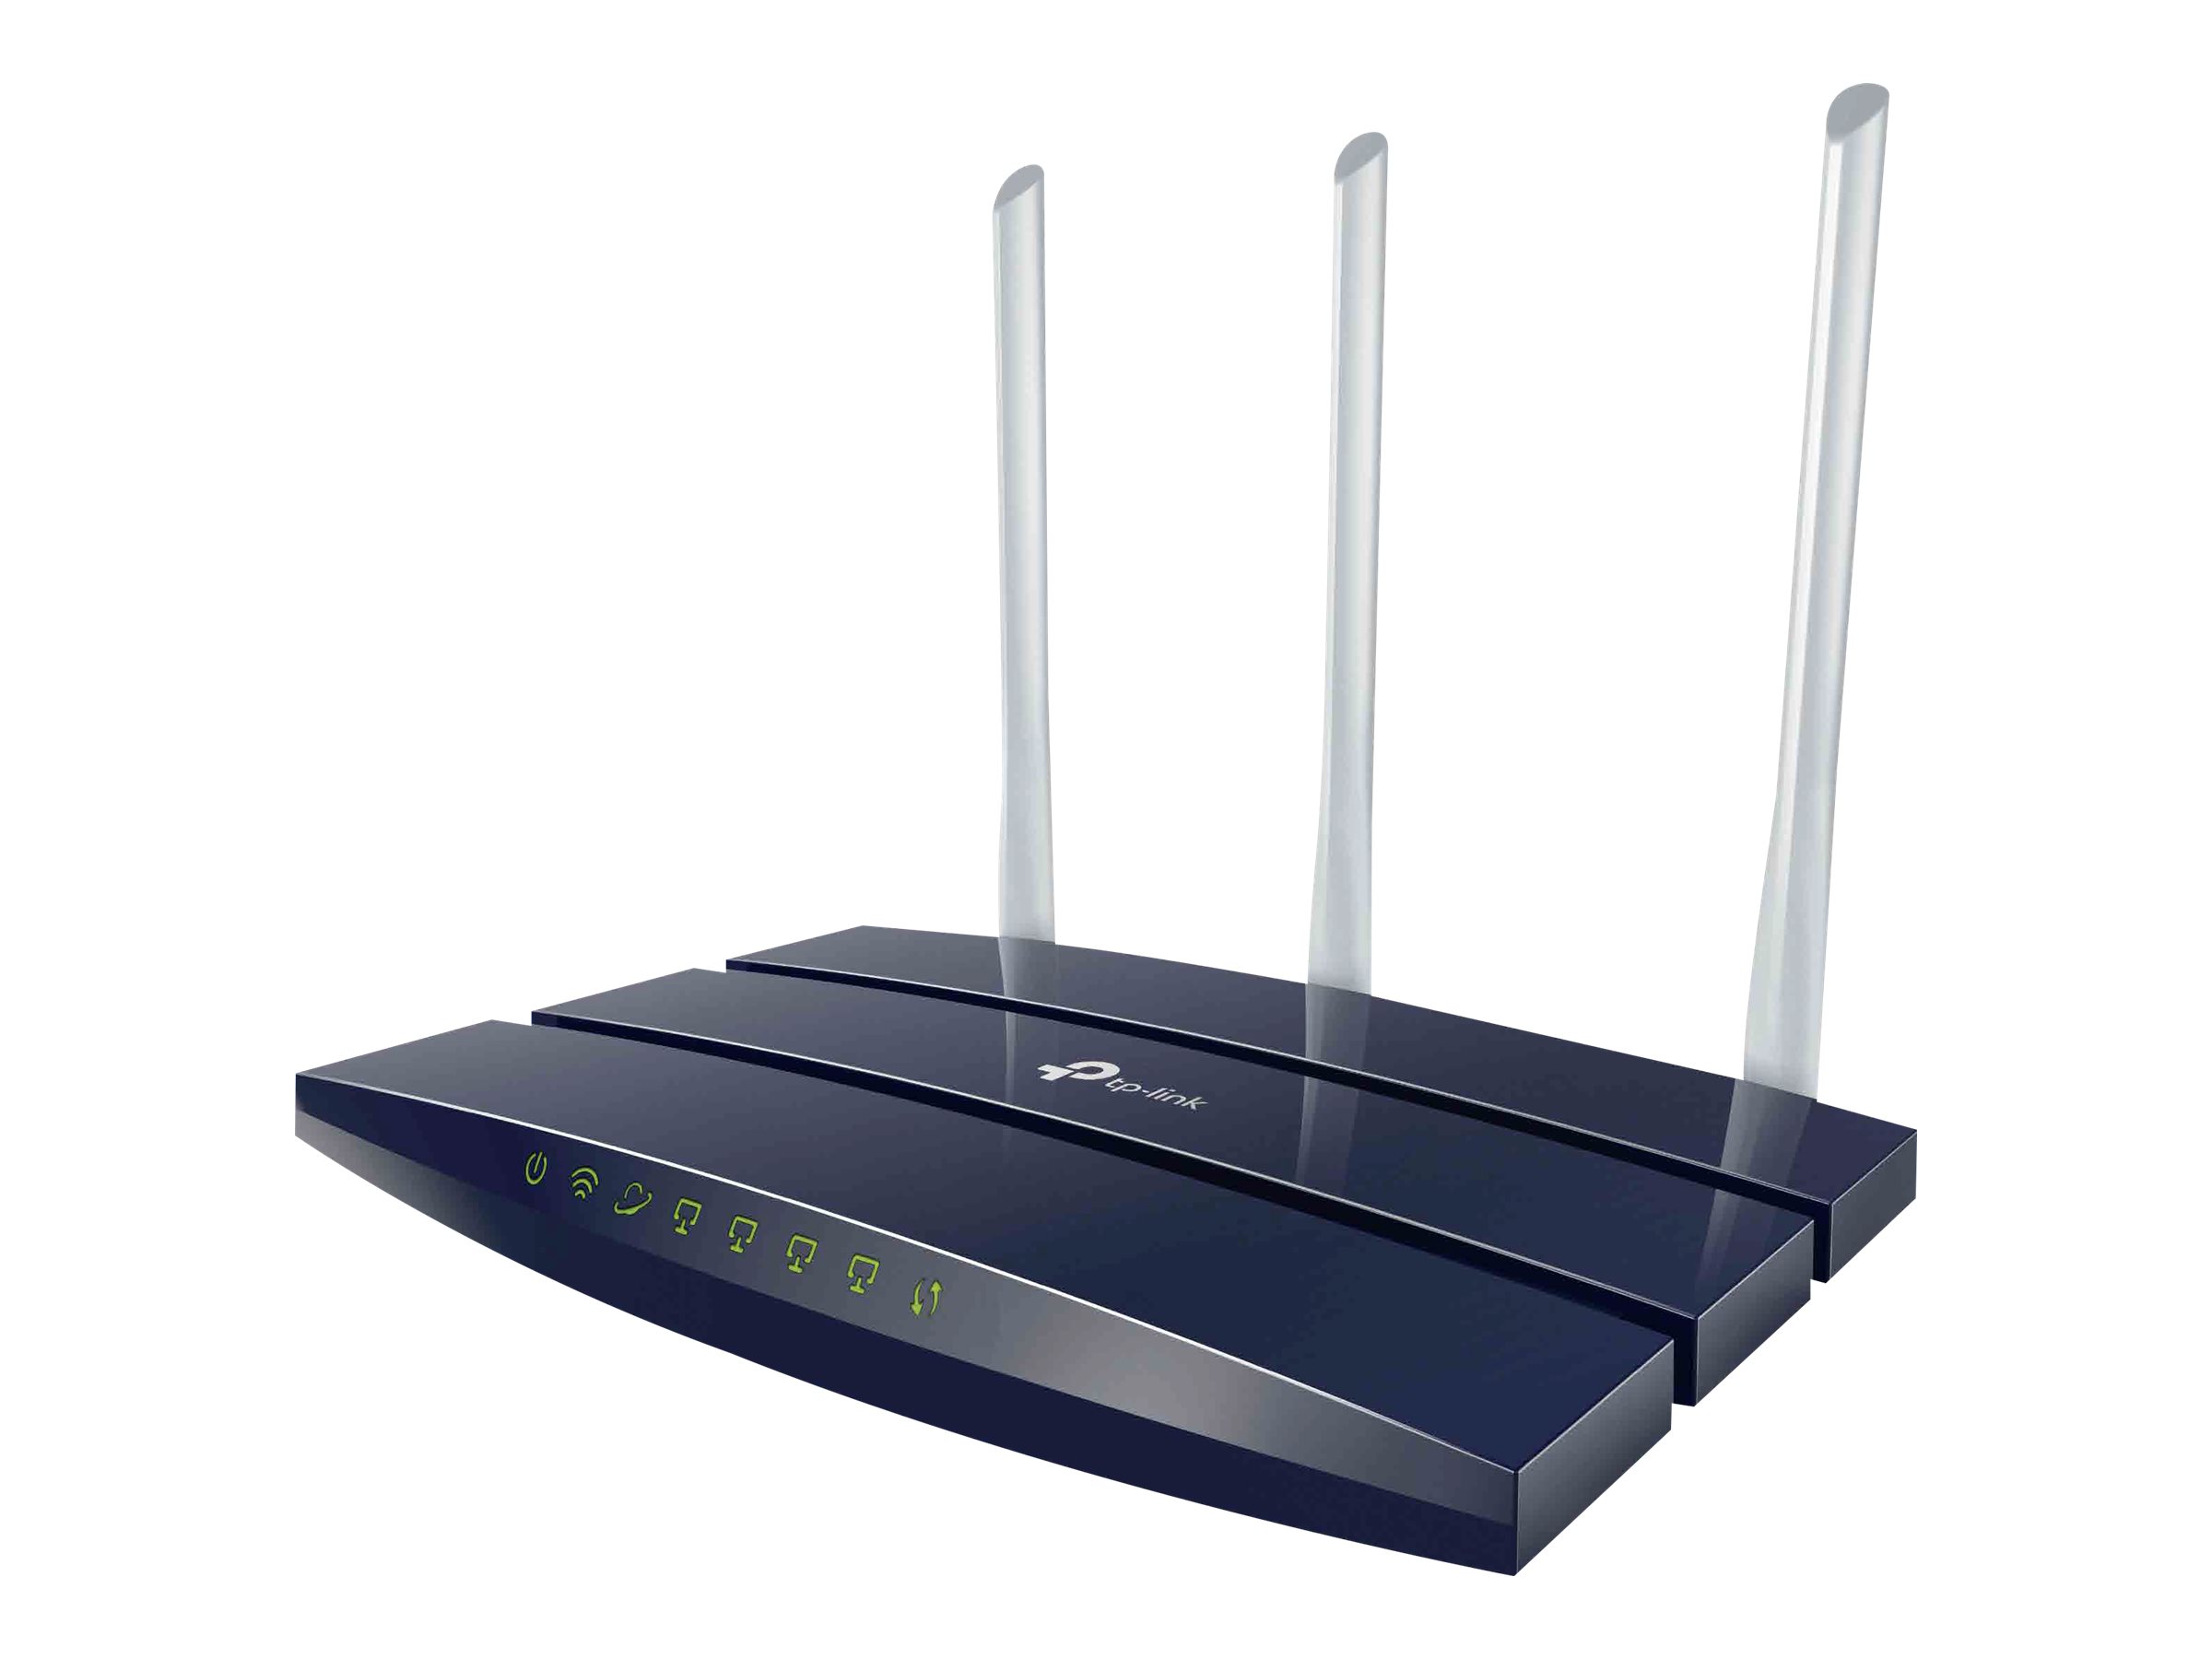 TP-Link TL-WR1043N - Wireless router - 4-port switch - 1GbE - Wi-Fi - 2.4 GHz - image 1 of 6